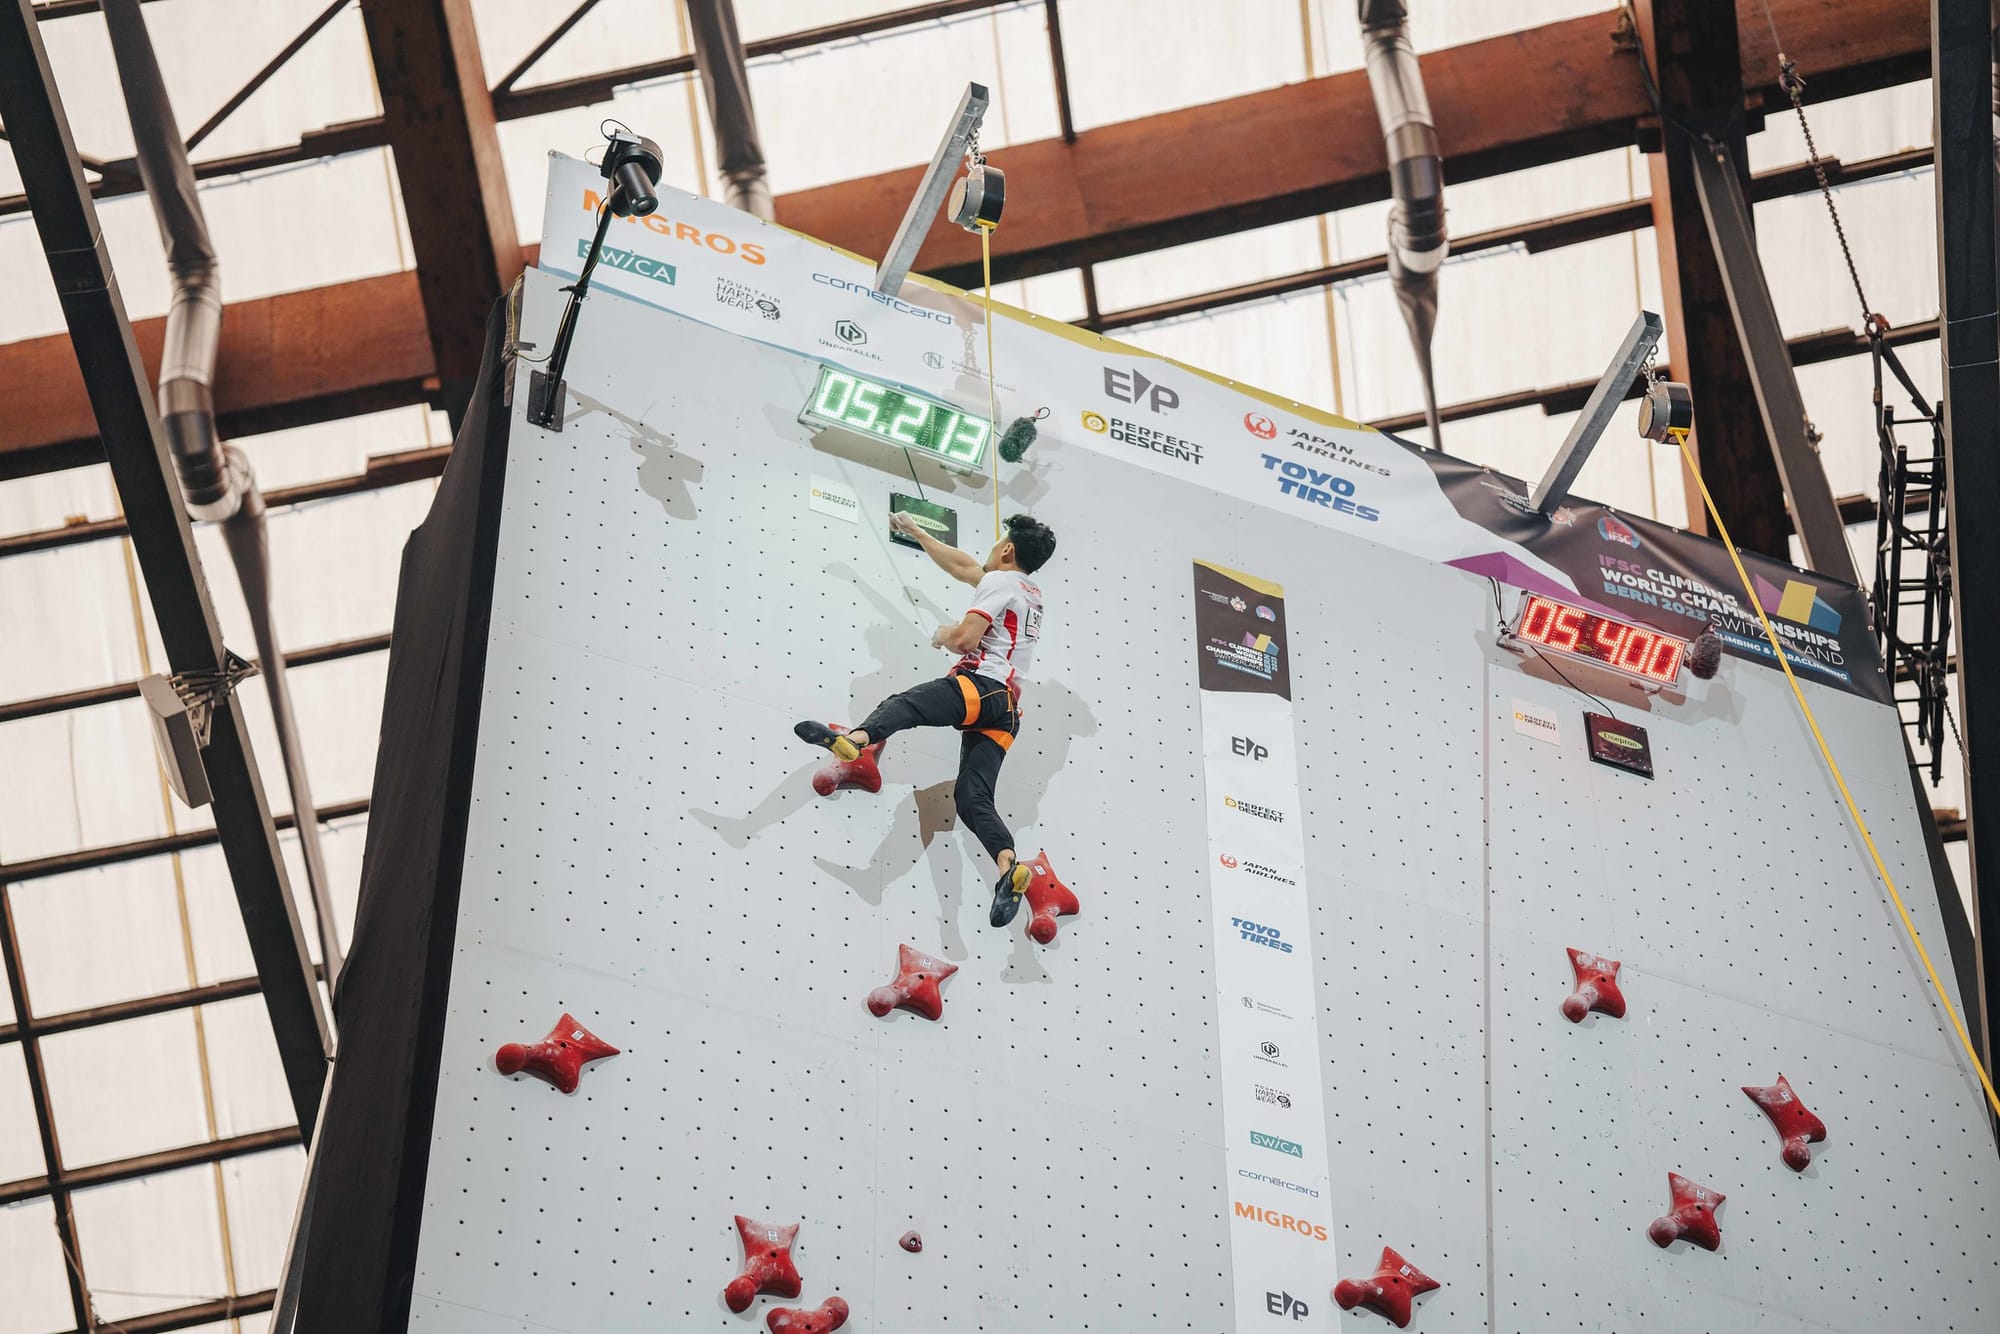 Veddriq Leonardo of Indonesia competes in the men's Speed qualification during the IFSC World Championships in Bern (SUI)